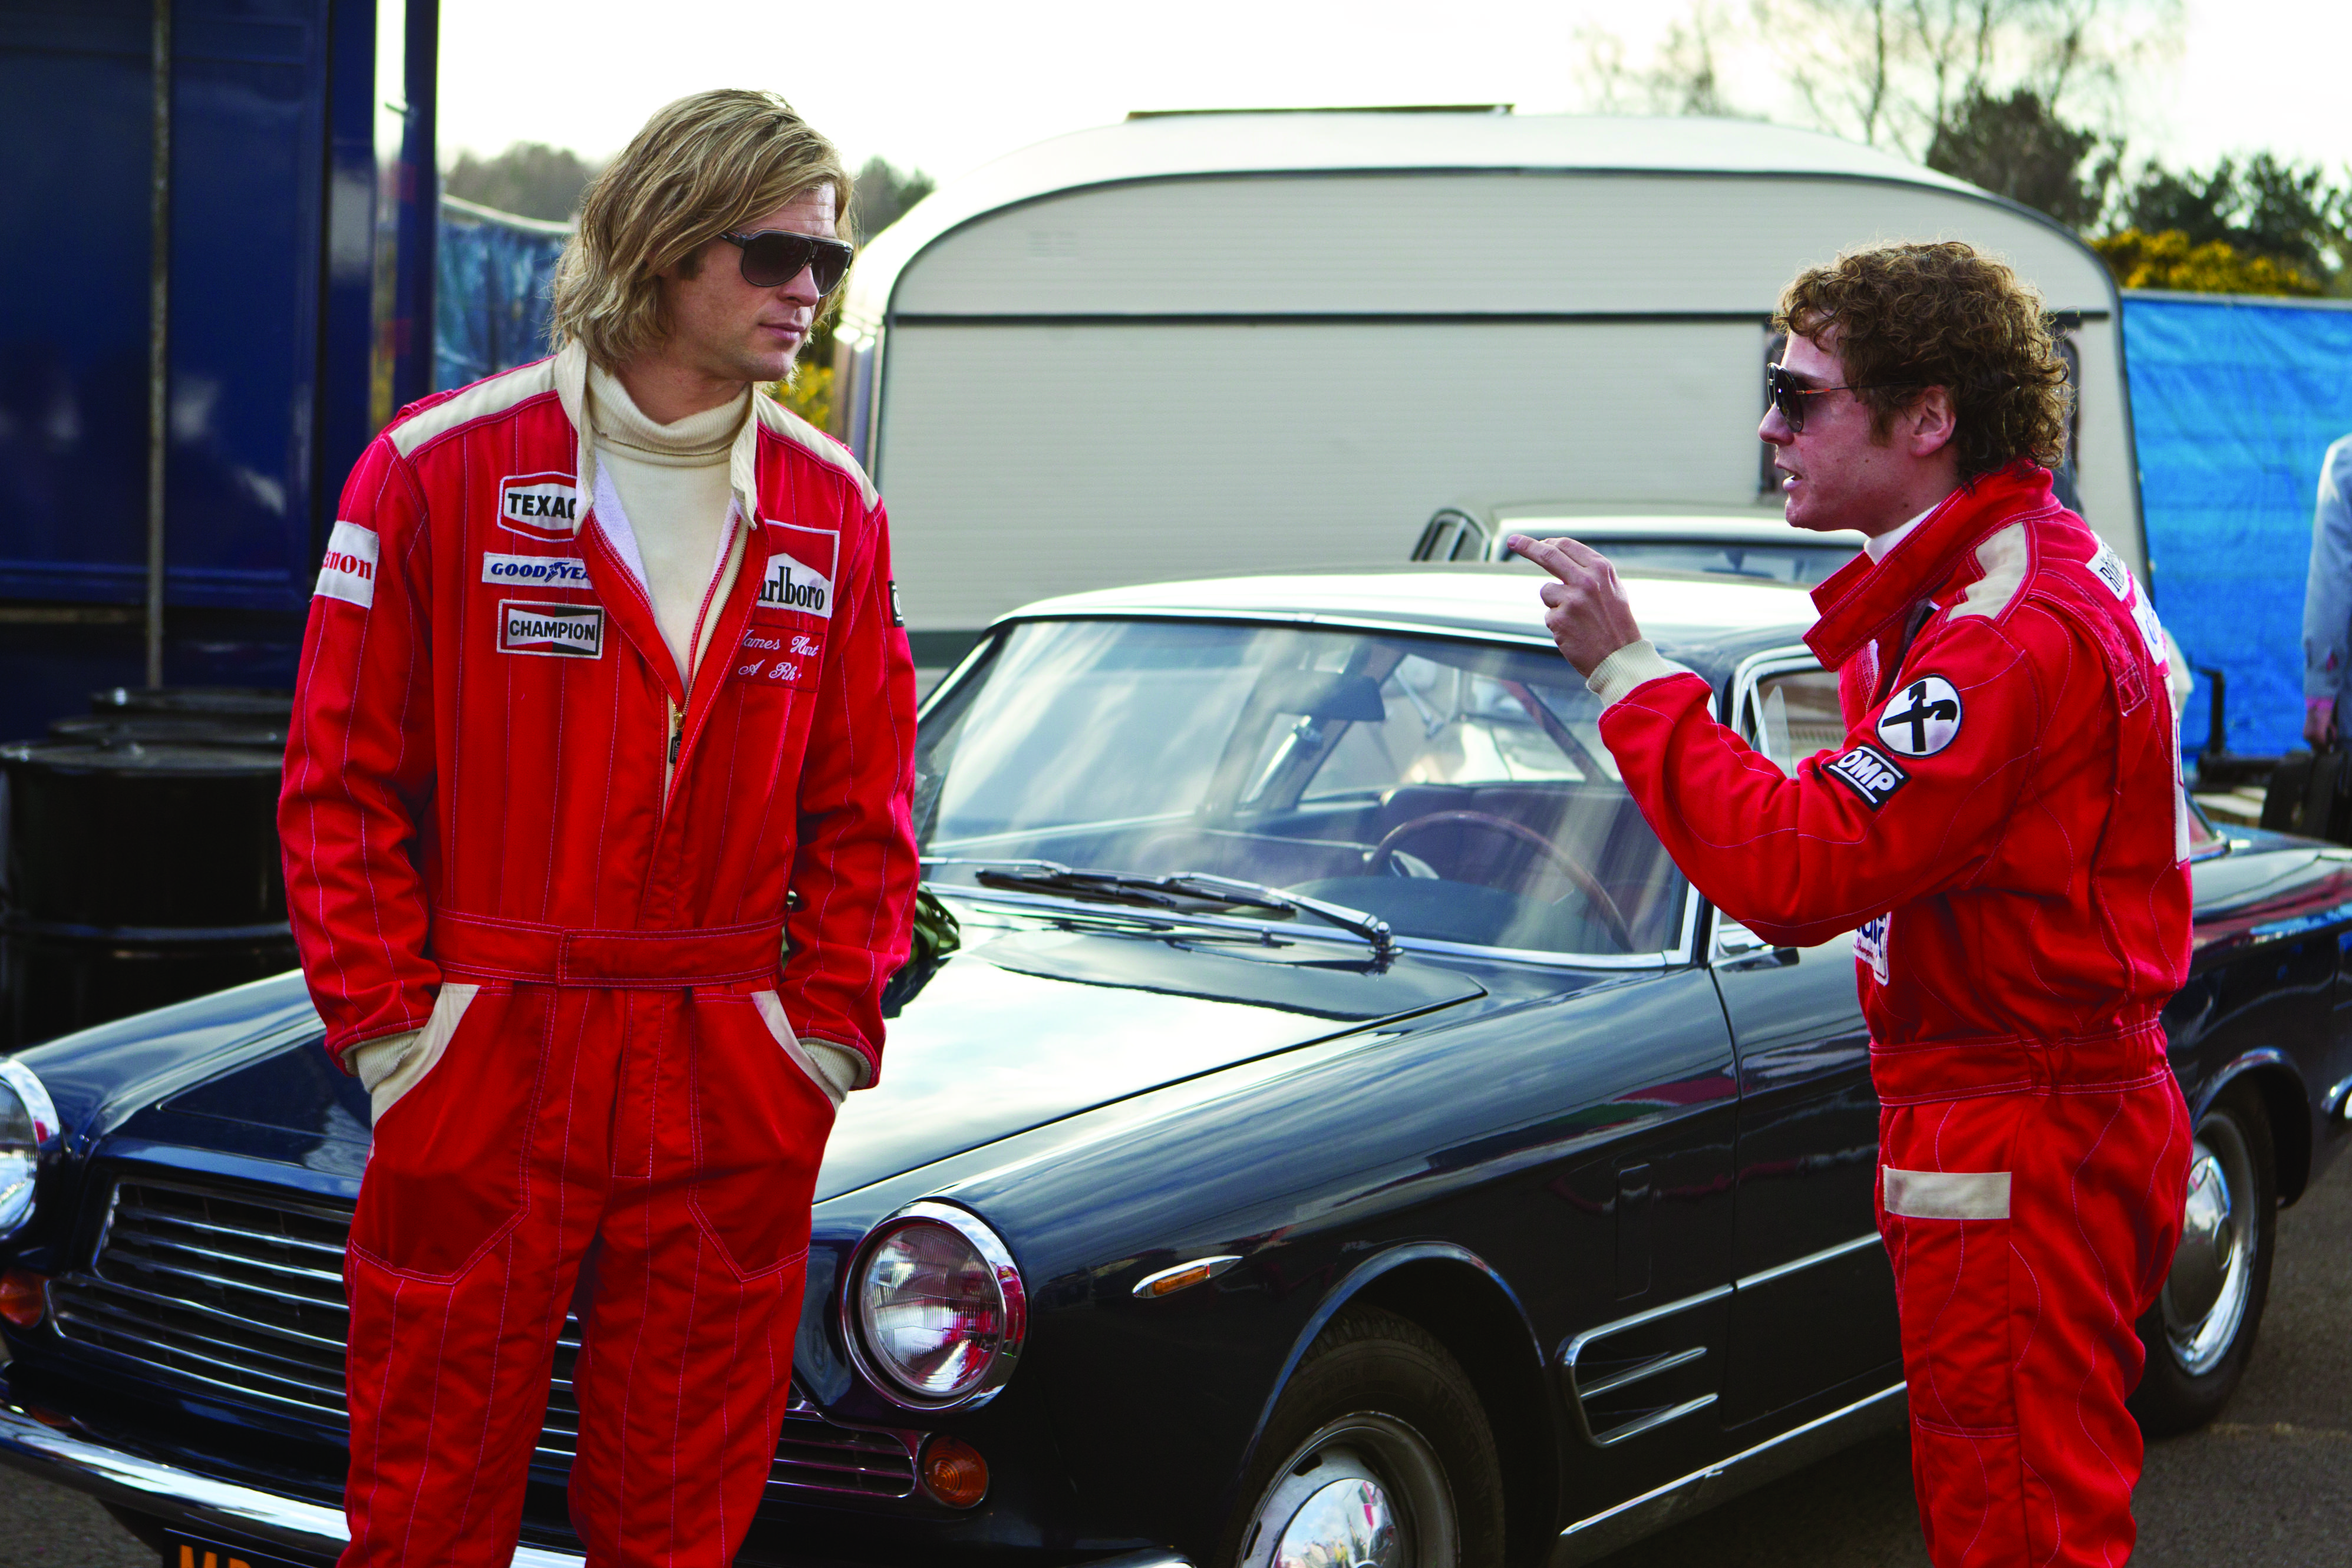 Hemsworth (left) and Bruhl as dueling drivers.